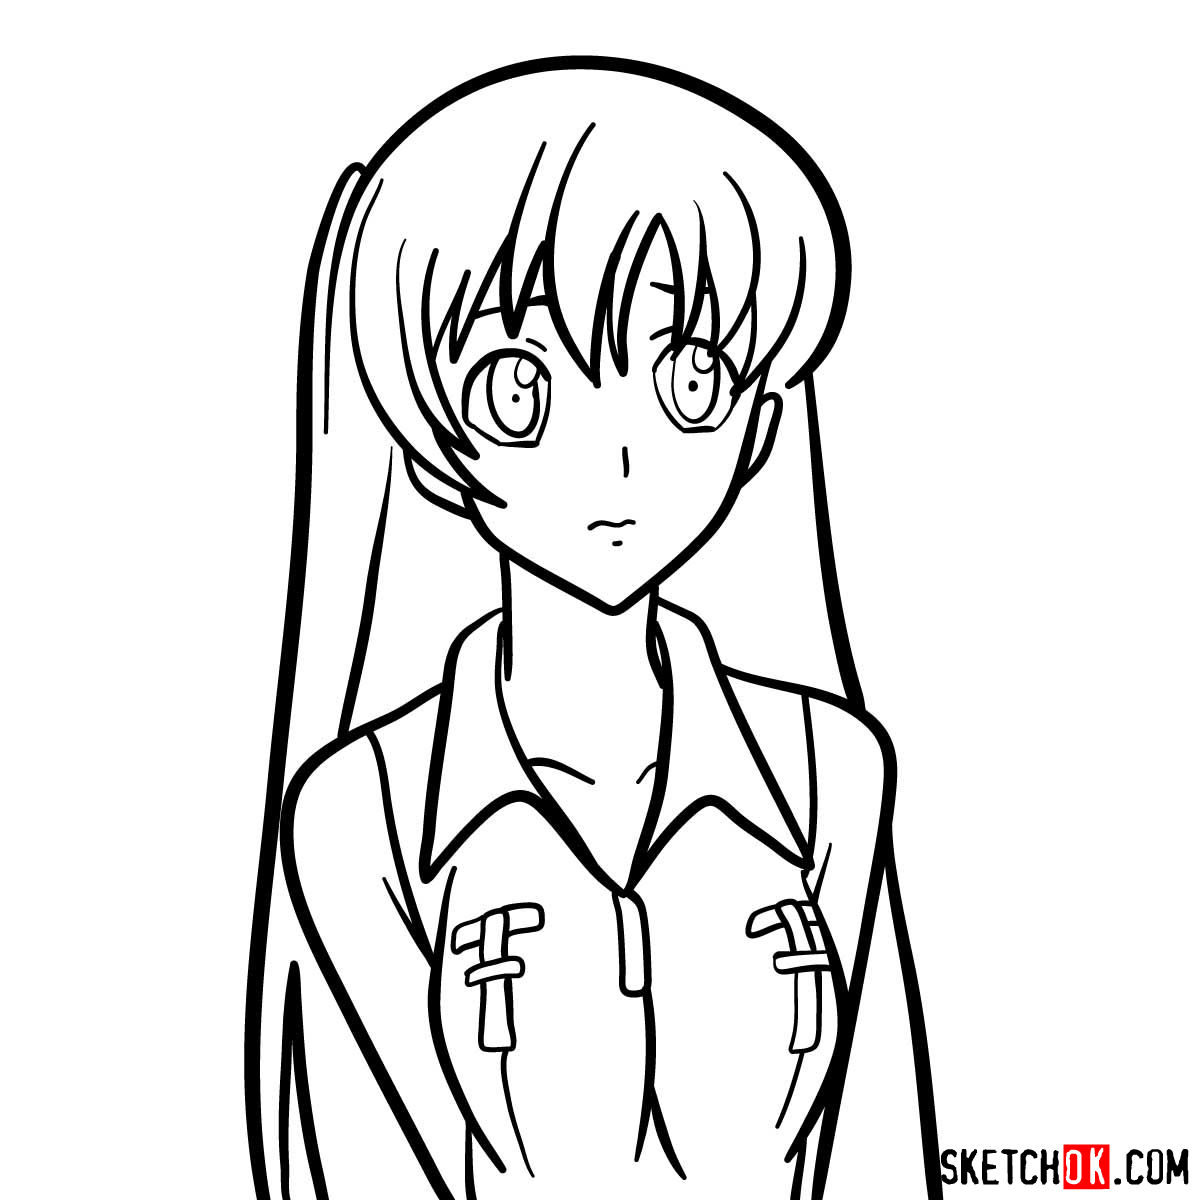 How to draw Shirley's face | Code Geass anime - step 10